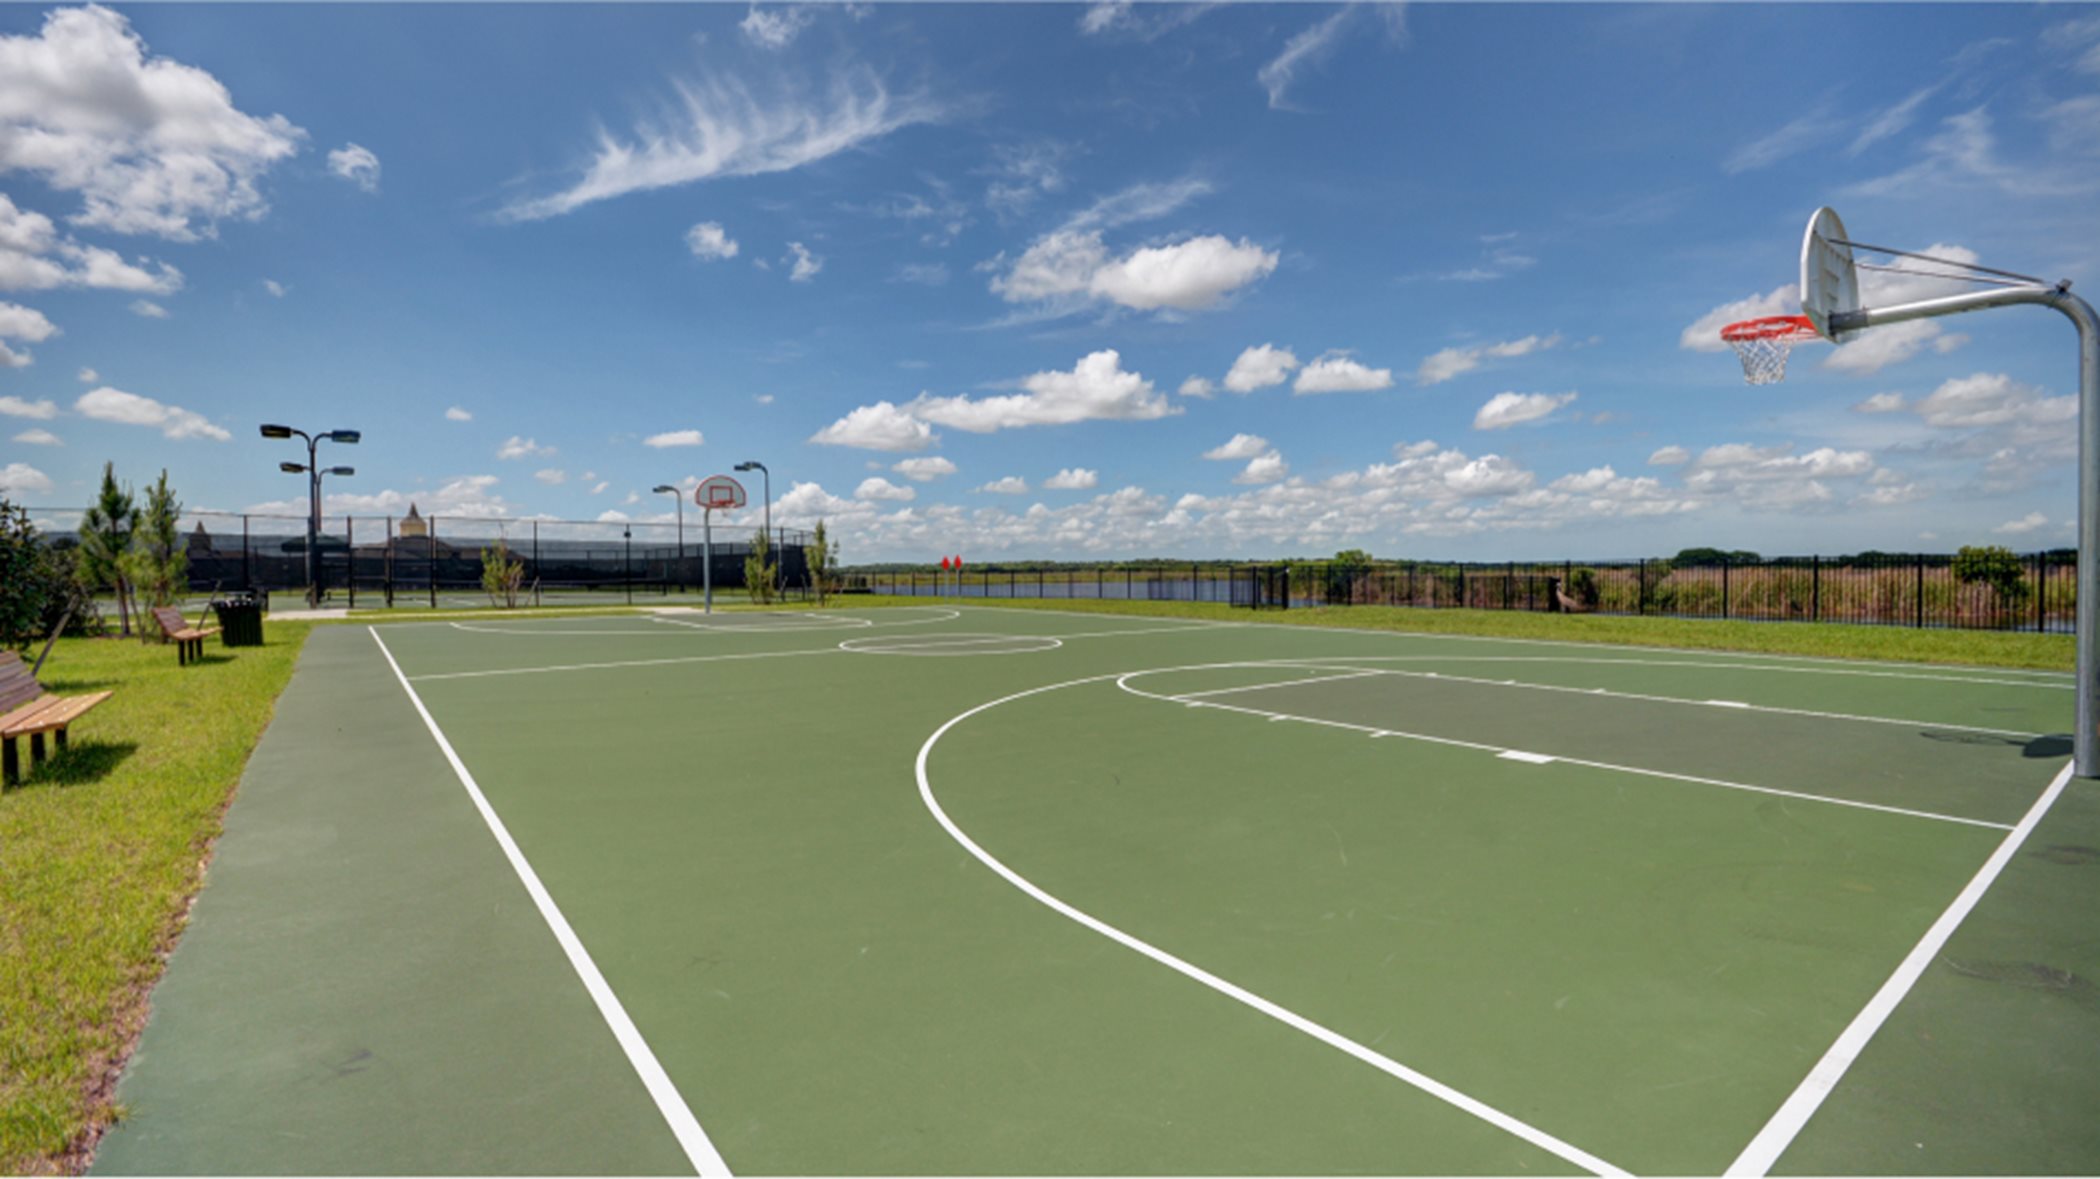 Two outdoor basketball courts